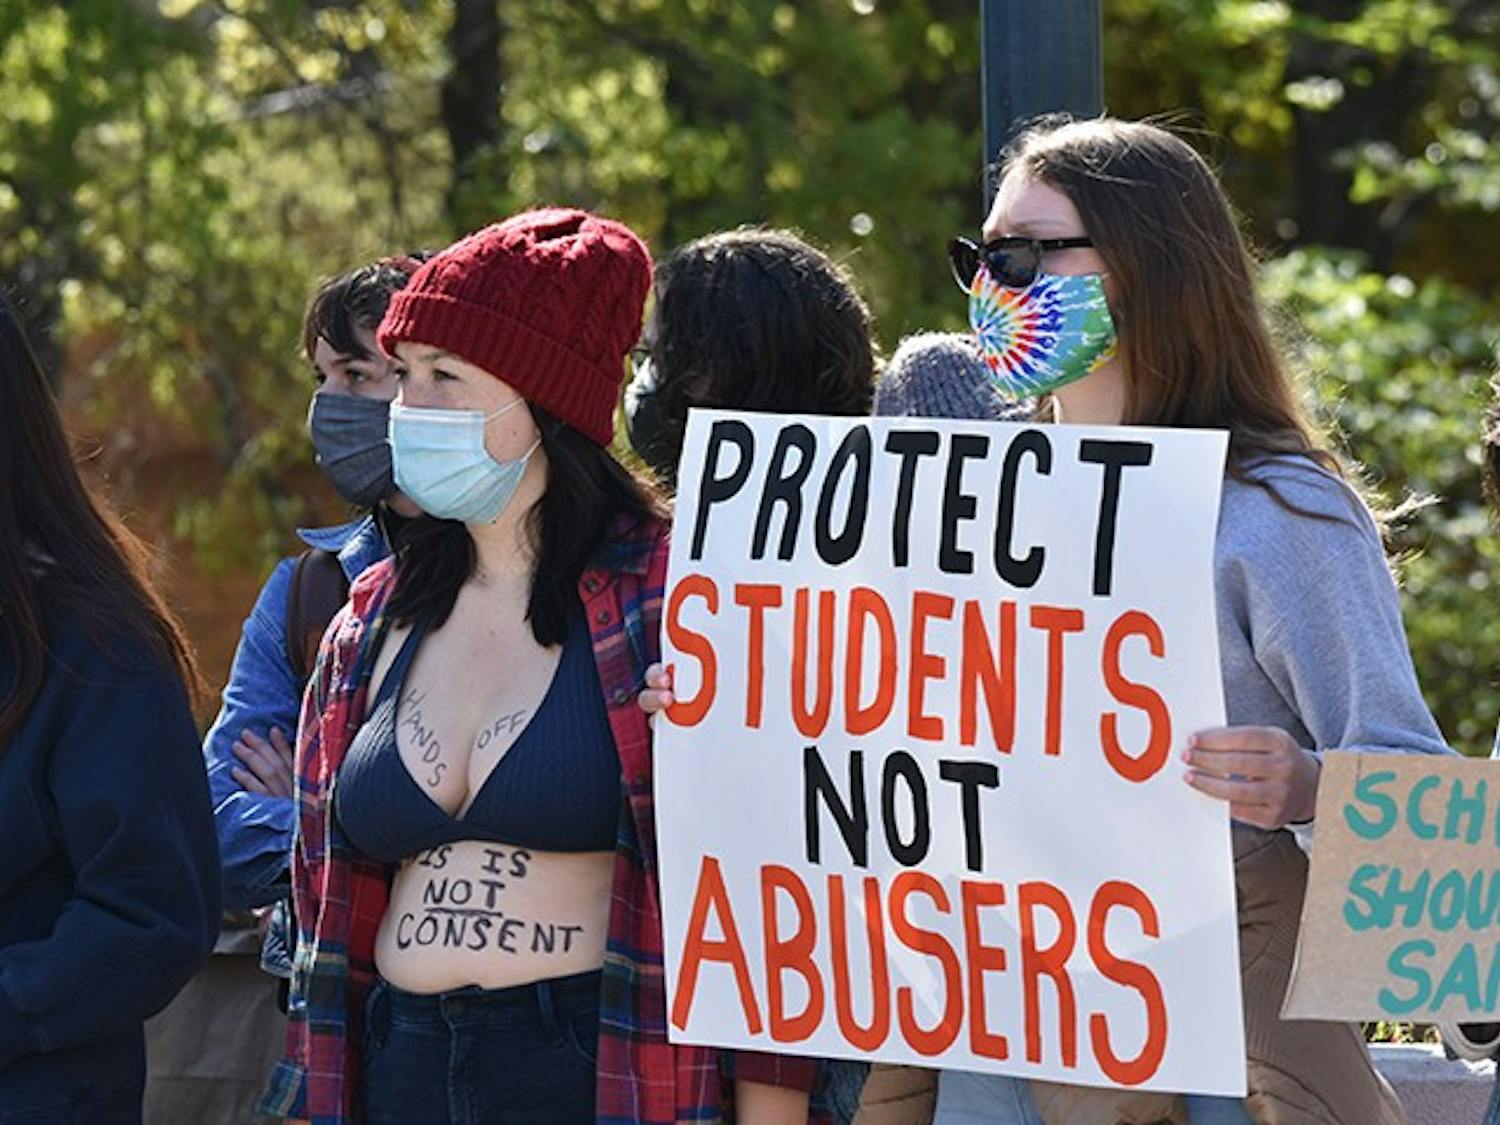 A protestor on Pickens Street Bridge holds a sign that reads, “PROTECT STUDENTS NOT ABUSERS,” and another has written, “This is not consent” and “hands off” on their body in support of the former students that accused professors of assault.